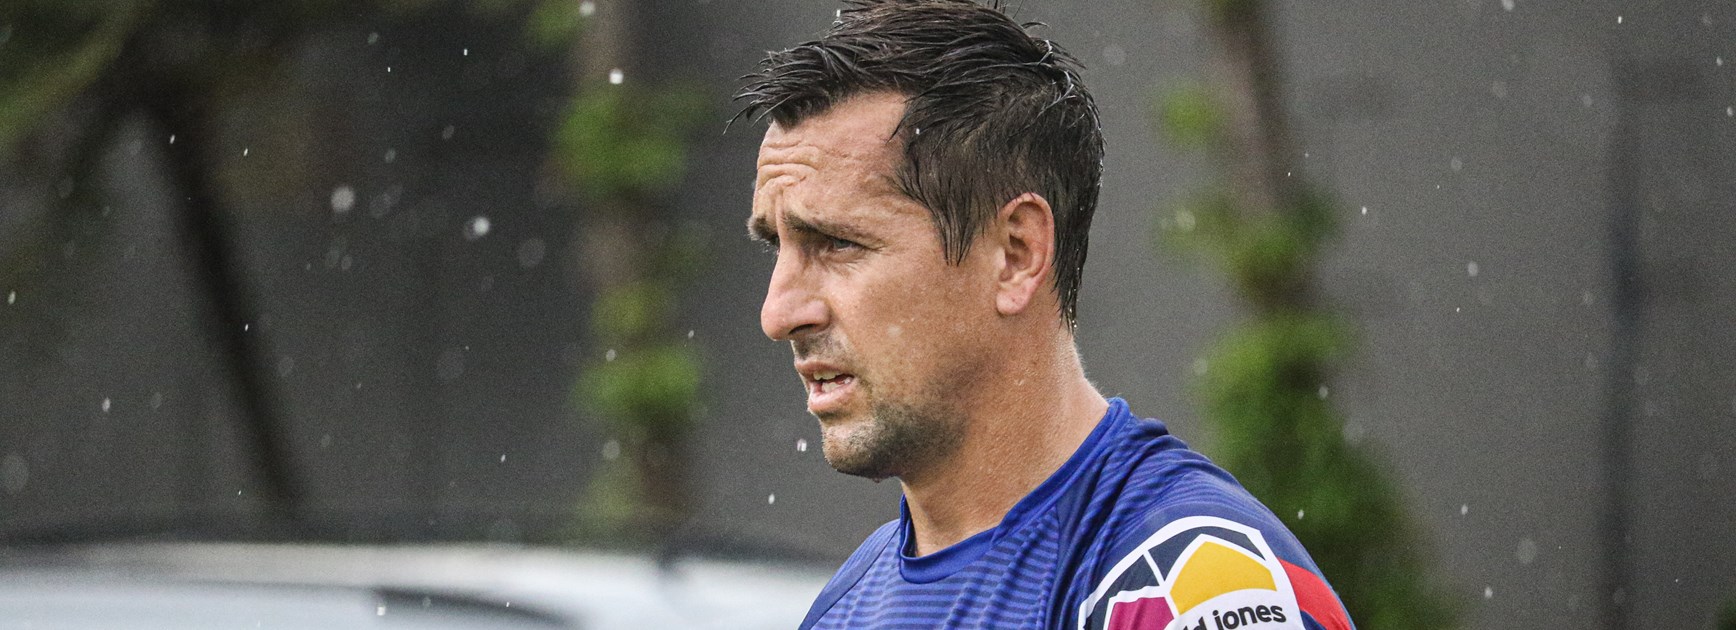 In the News: Gidley returns, Pearce eyes 300, Watson's new role